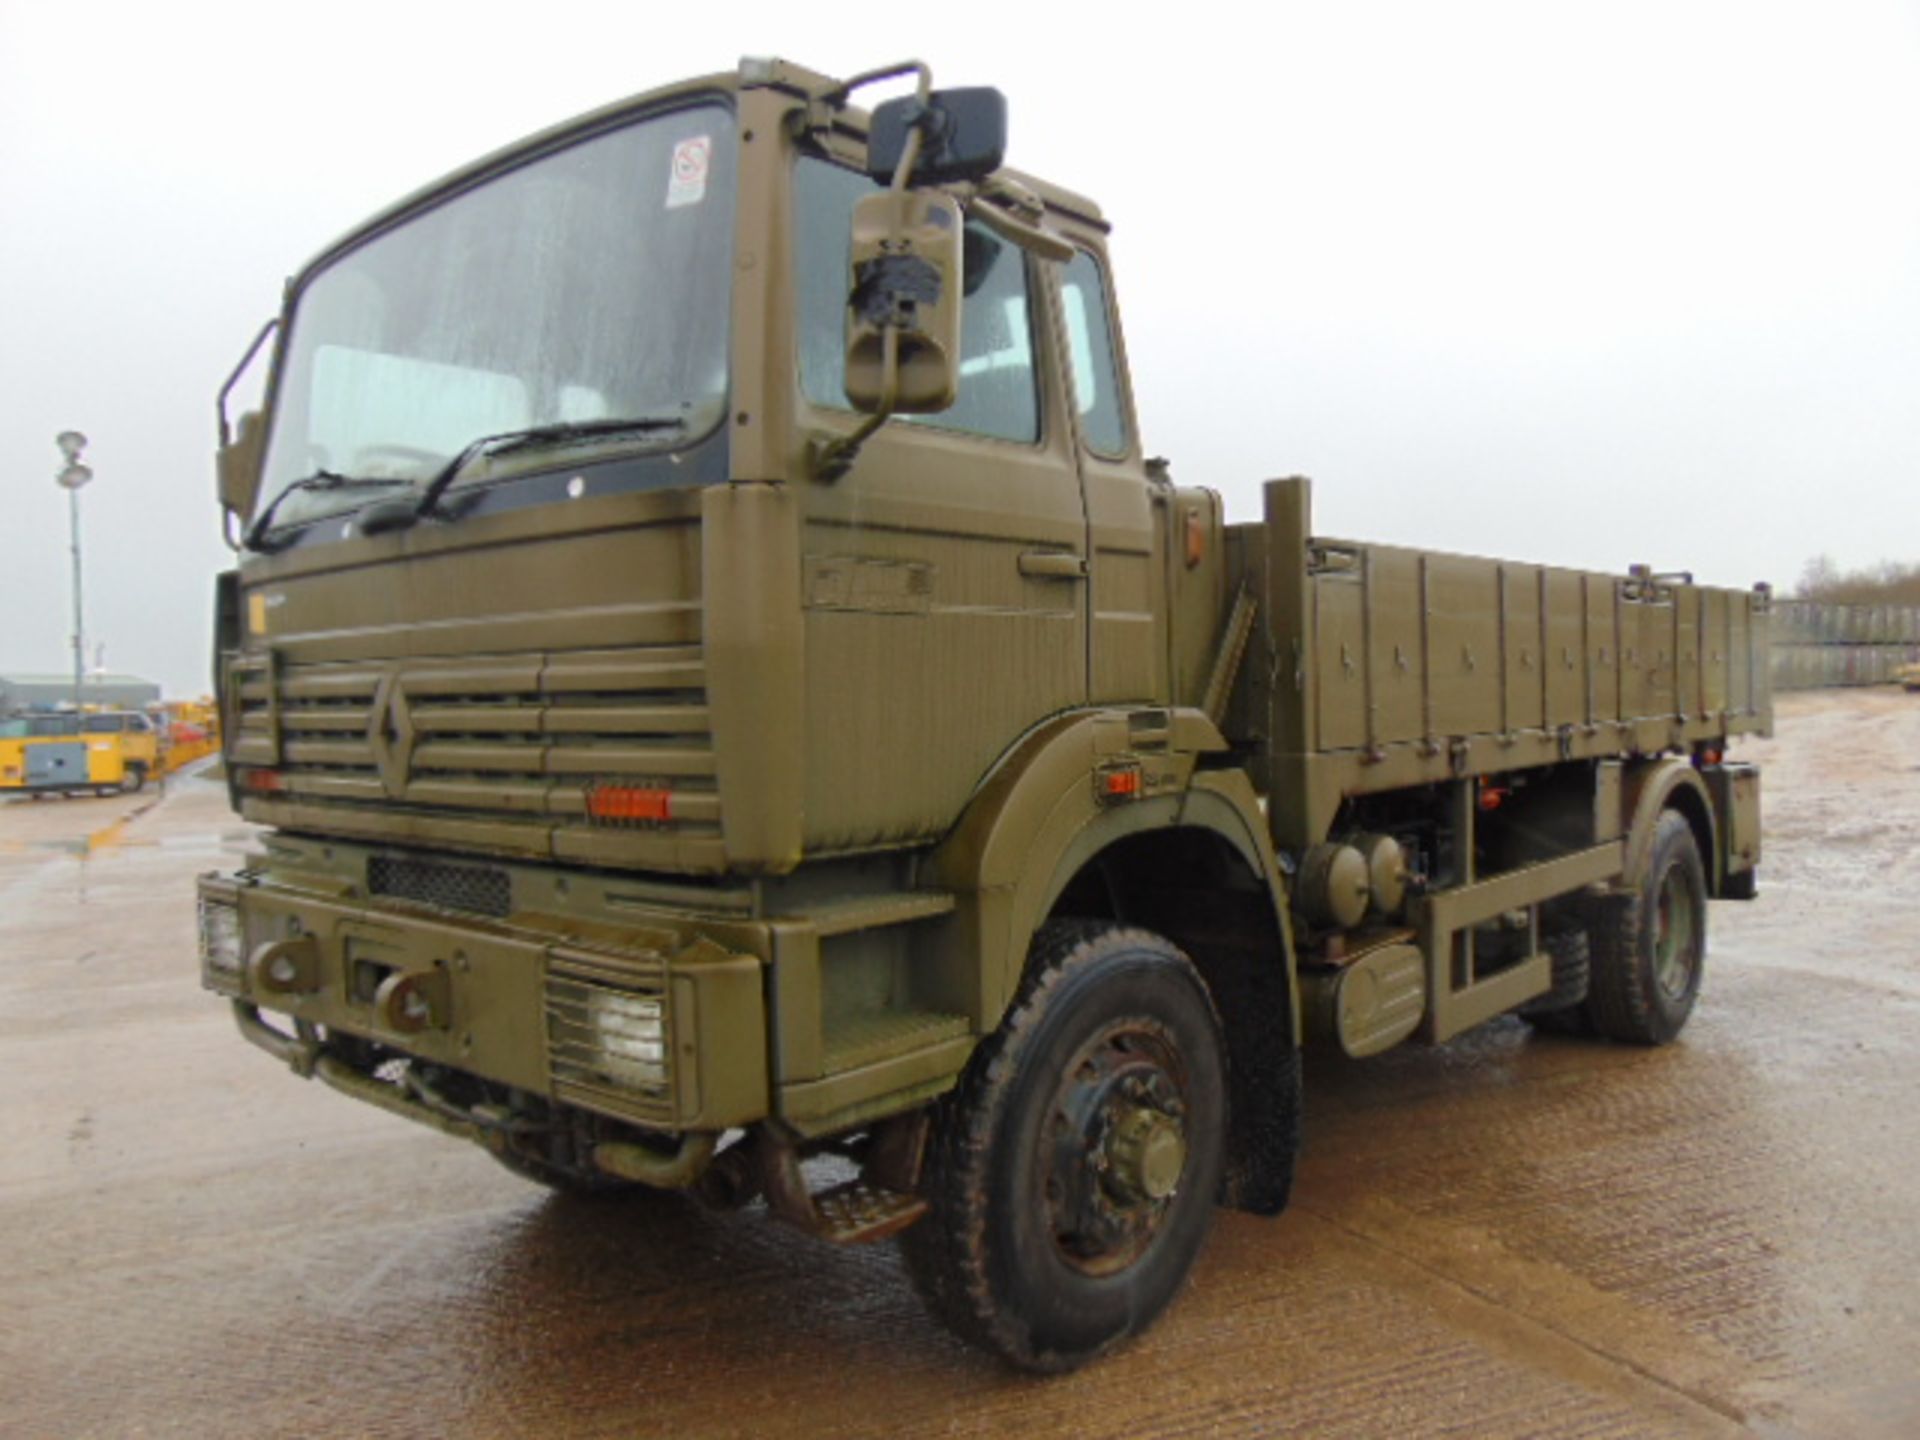 Renault G300 Maxter RHD 4x4 8T Cargo Truck with Fitted Winch - Image 3 of 17